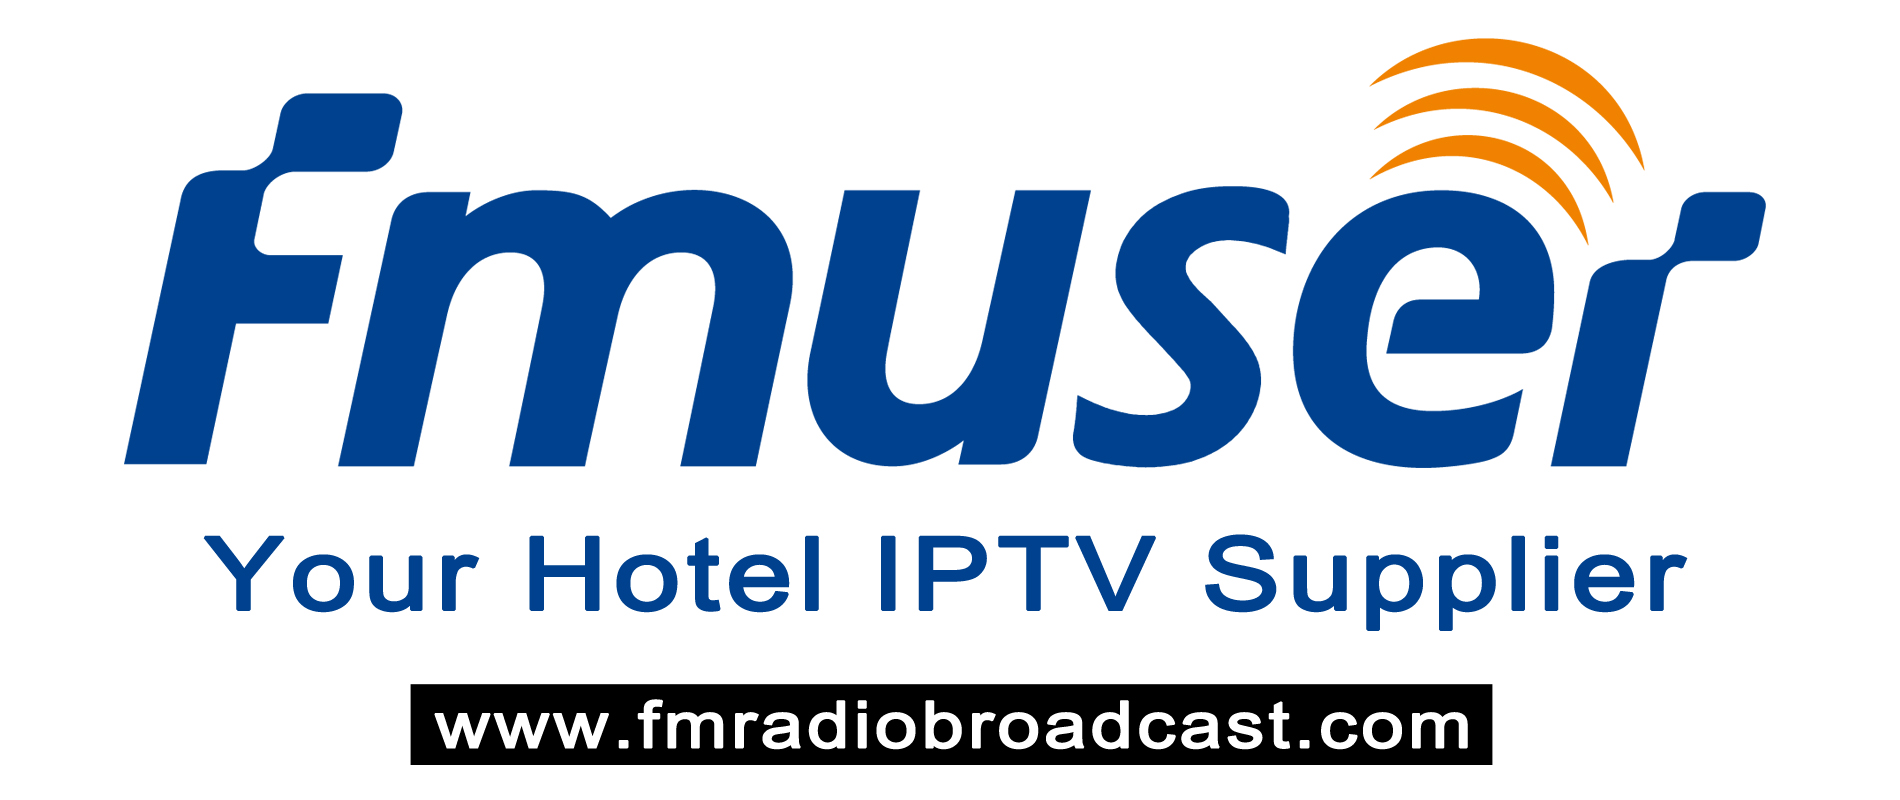 FMUSER Brings Advanced Technical Support to Jubail's Hotels through IPTV Hotel Solutions